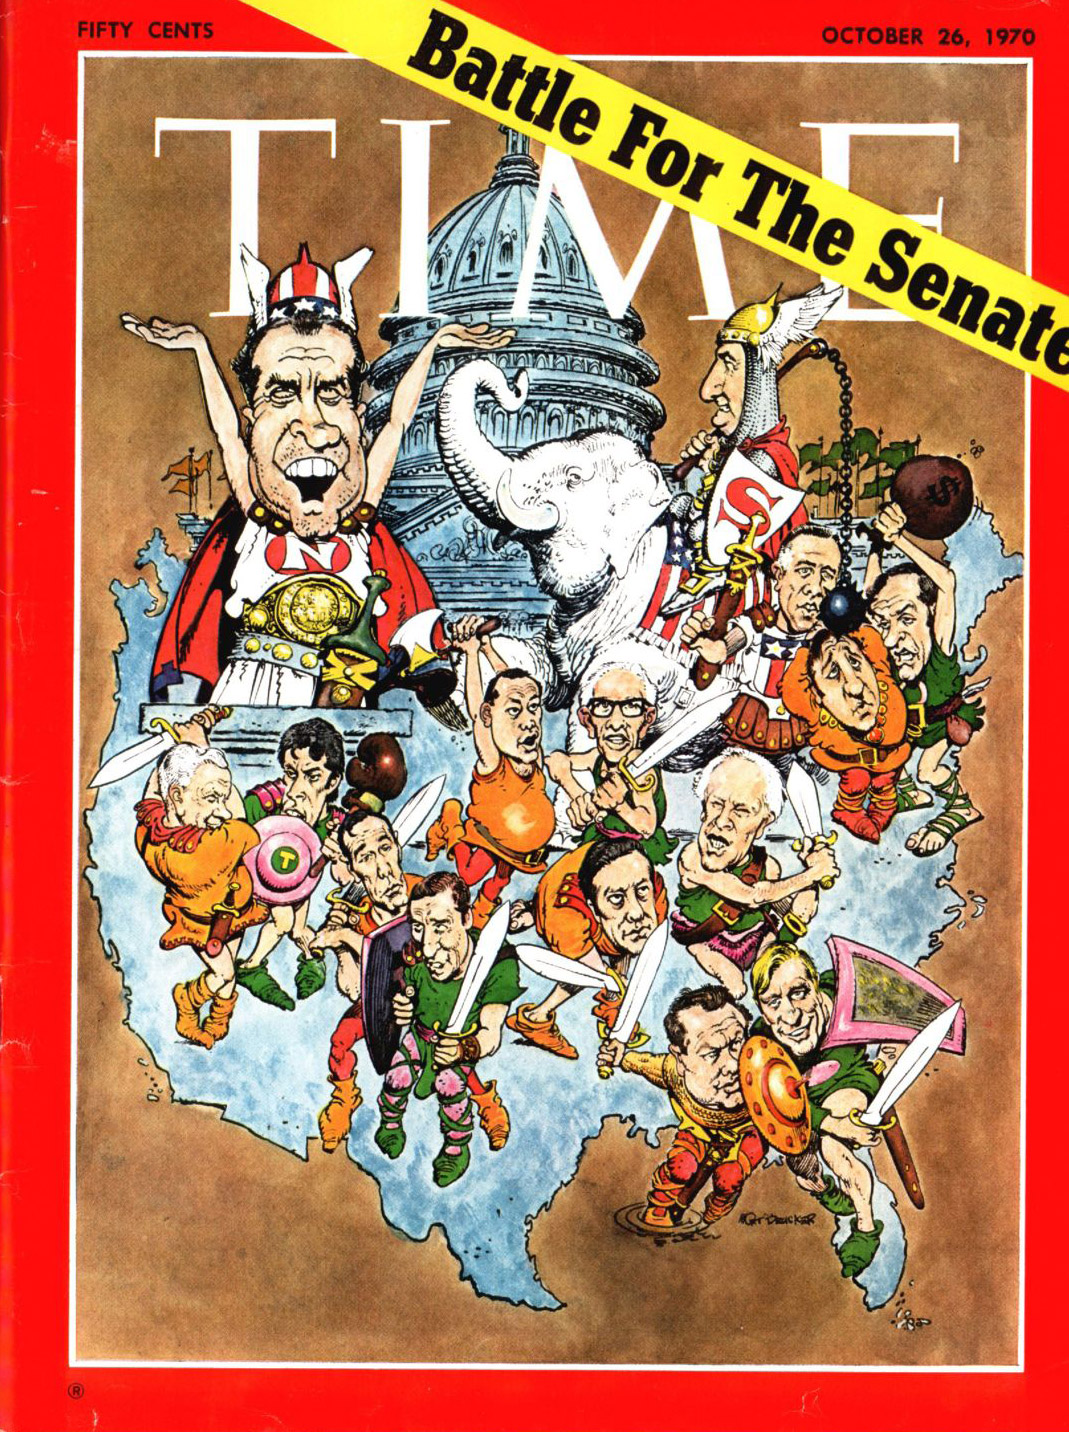 George H.W. Bush, pictured during his run for a Texas Senate seat, on the Oct. 26, 1970, cover of TIME. Illustration by Mort Drucker.